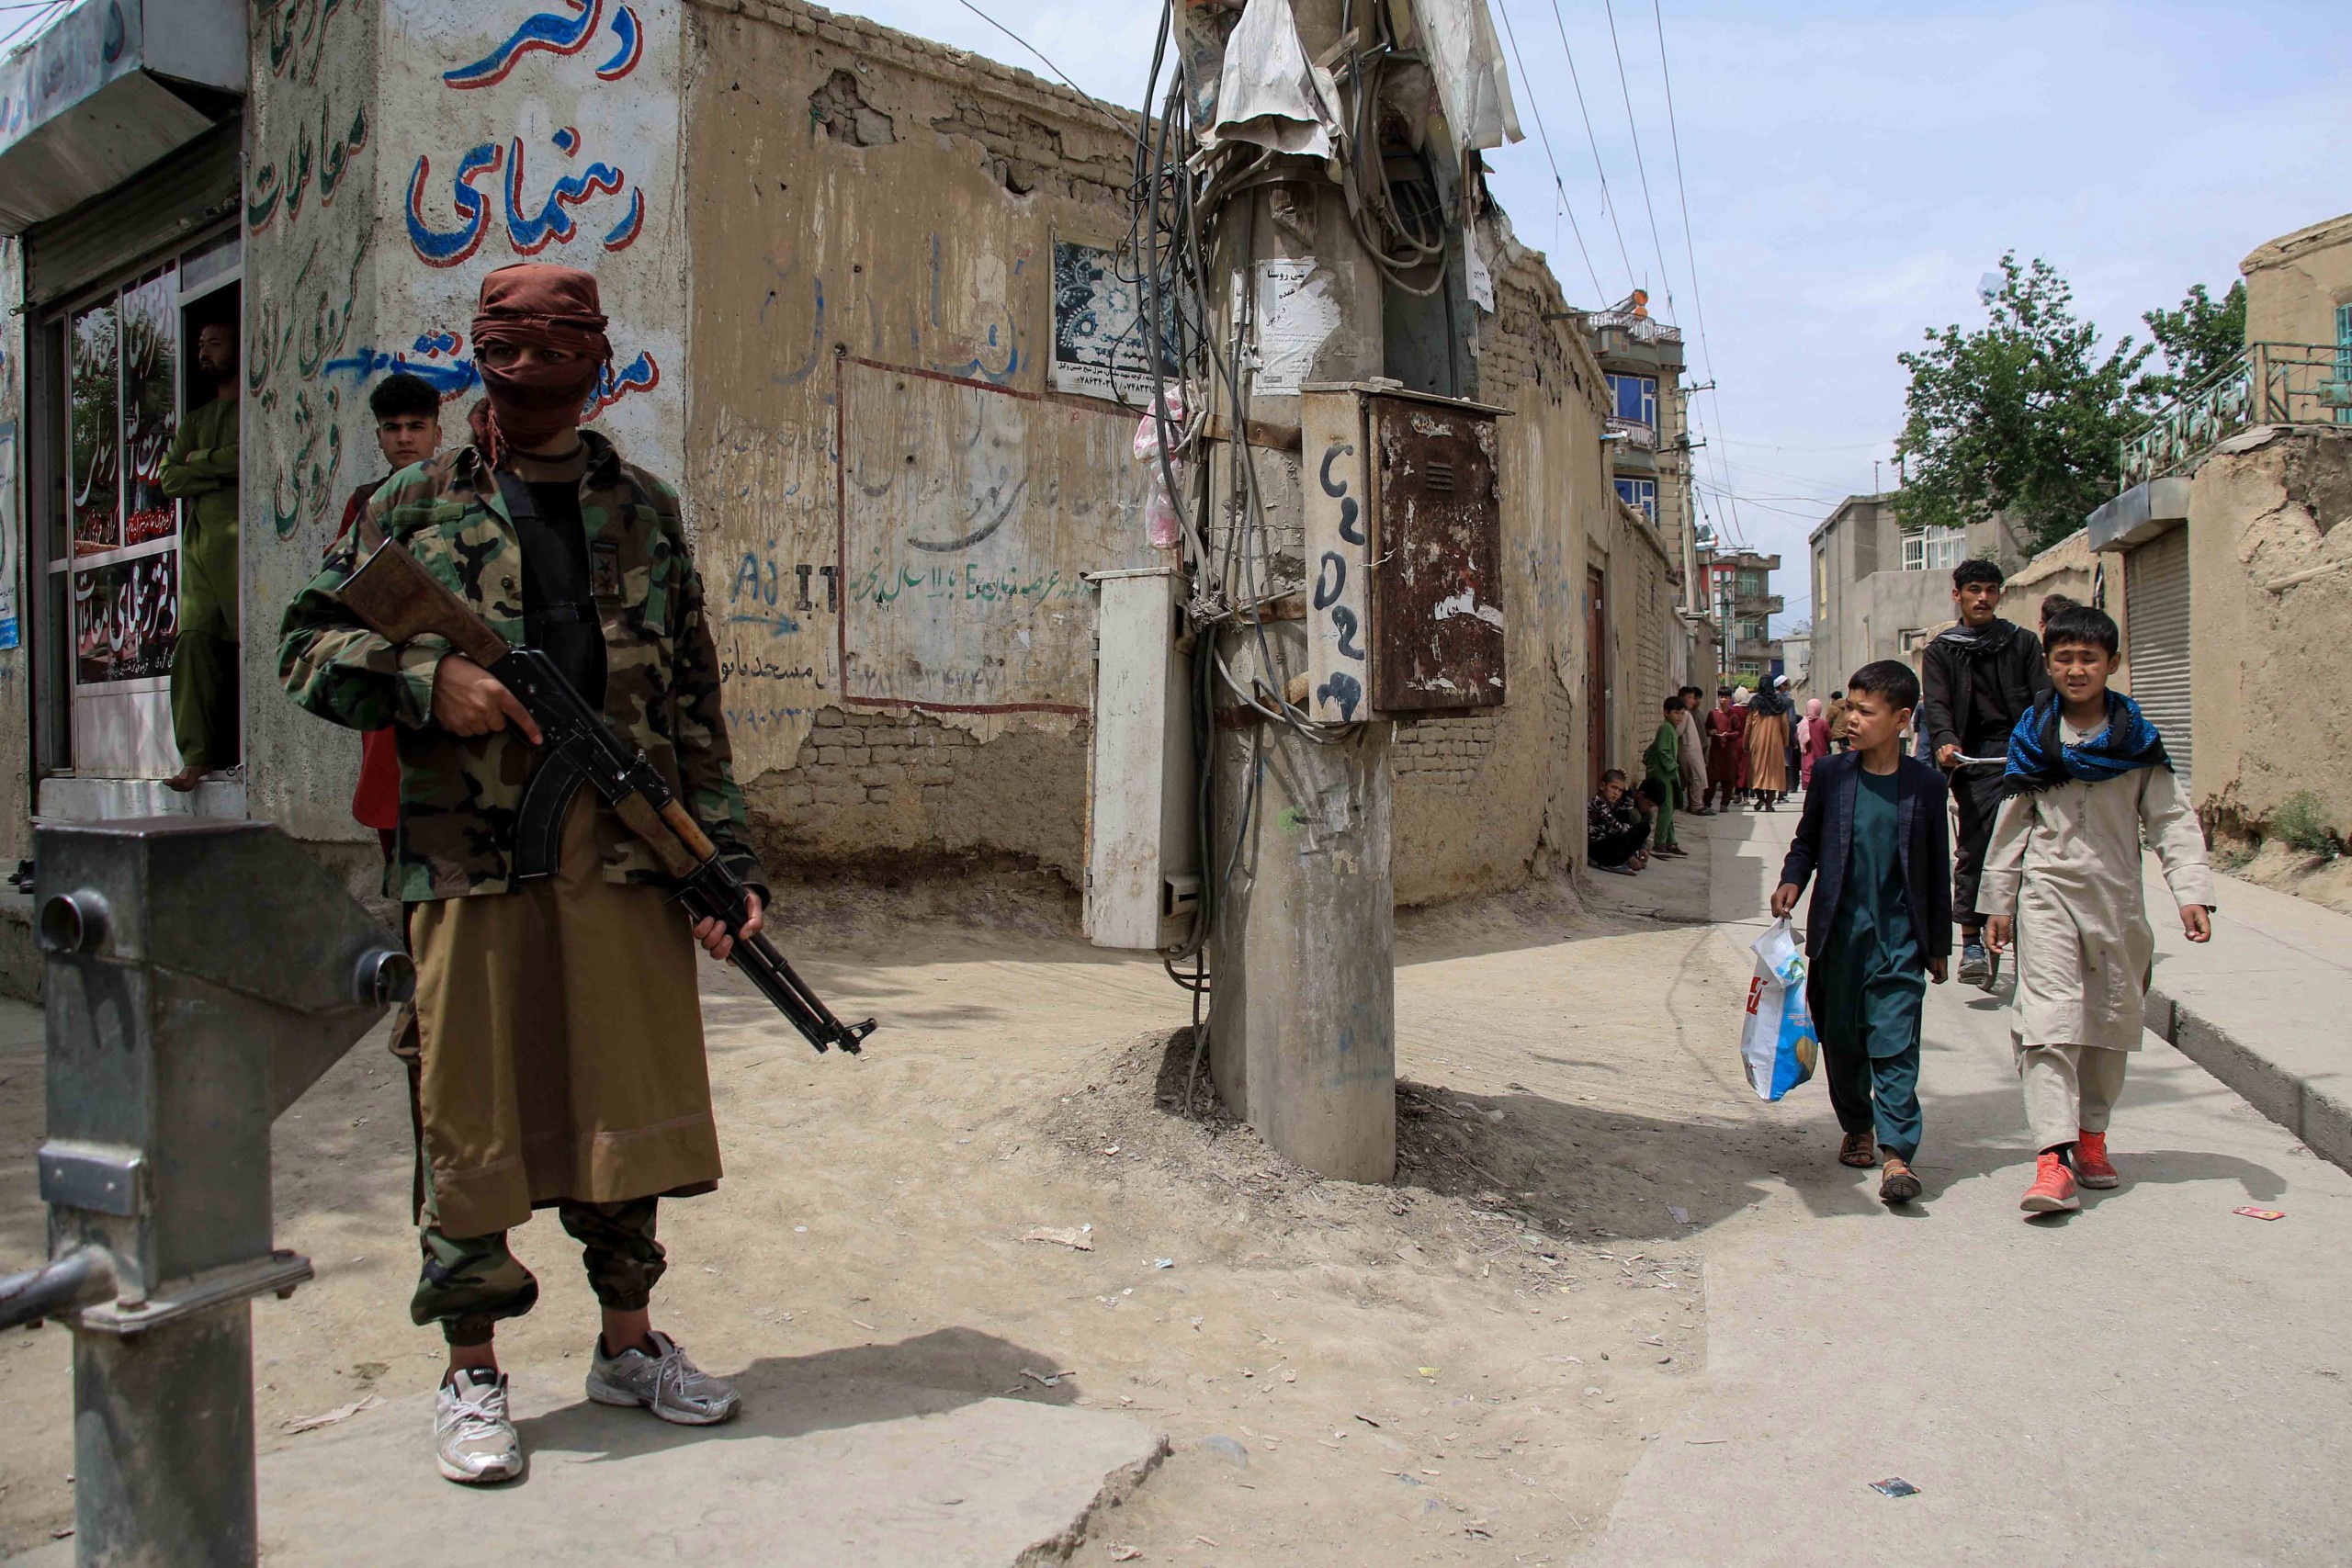 epa09896905 Taliban stand guard in an area surrounding a school in the aftermath of multiple bomb blasts in a Shi'ite majority neighborhood, in Kabul, Afghanistan, 19 April 2022. At least four people were killed and several others were injured in consecutive suspected suicide blasts.  EPA/STRINGER